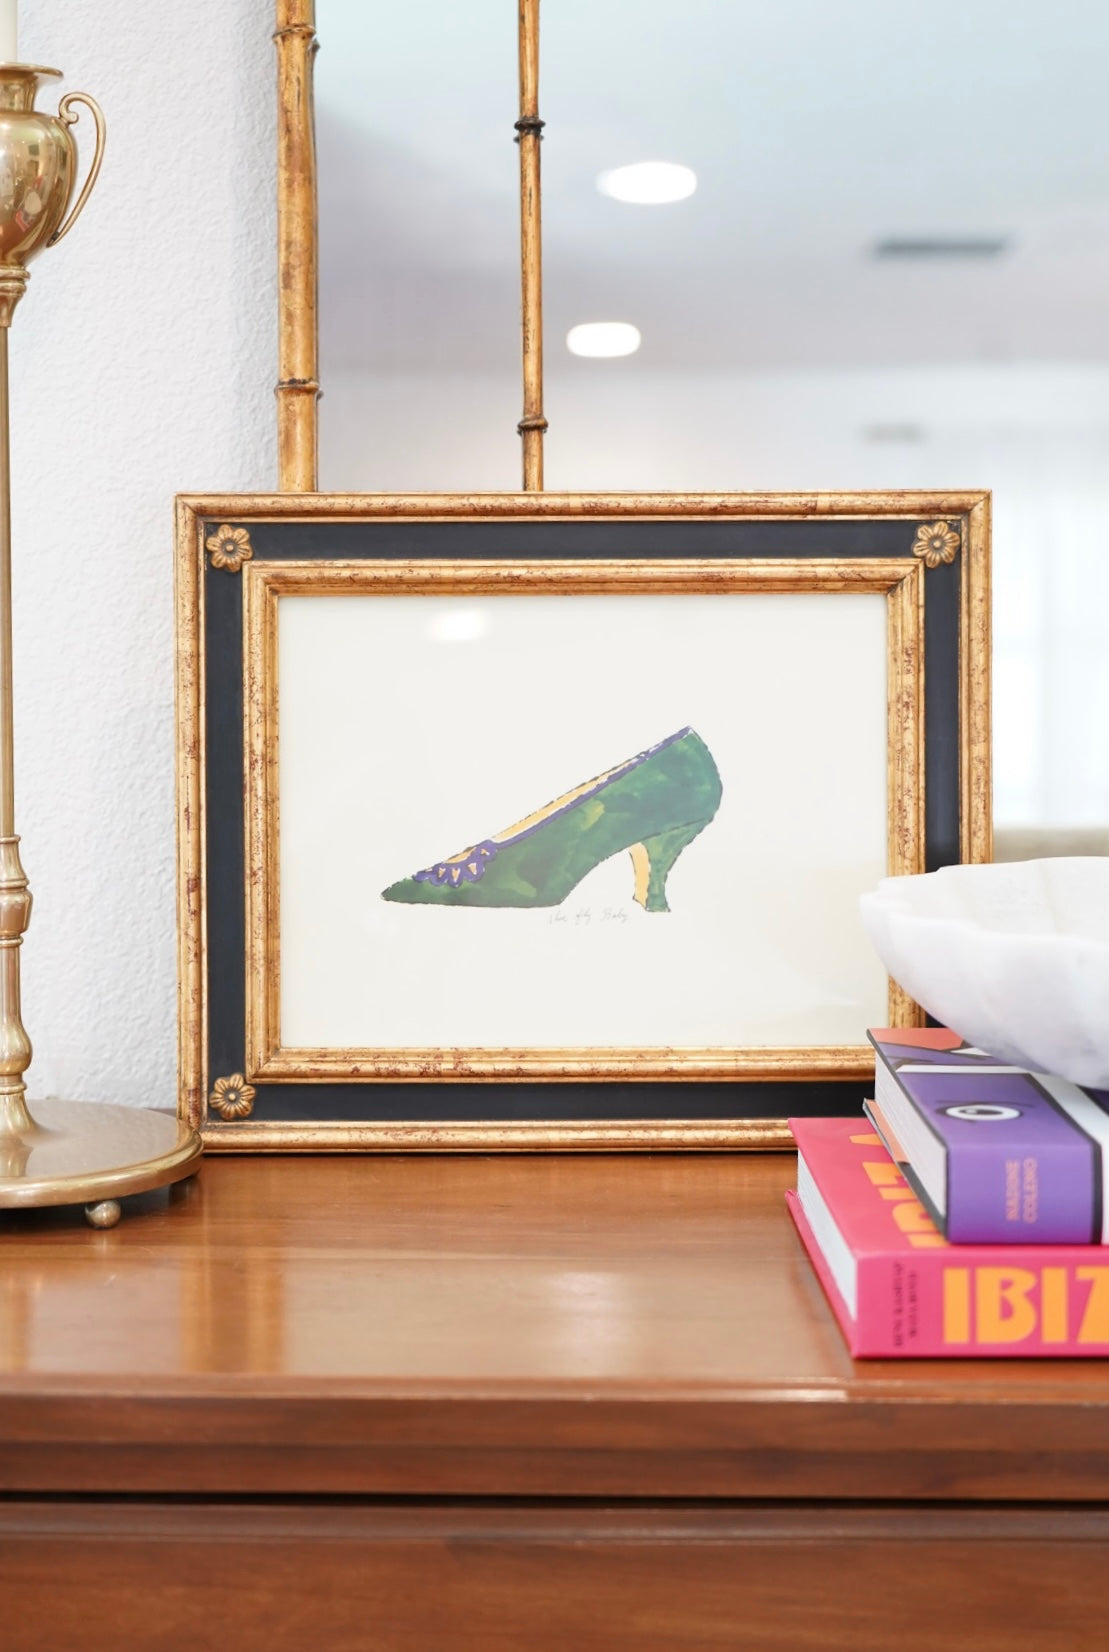 ANDY WARHOL “SHOE FLY BABY” LITHOGRAPH